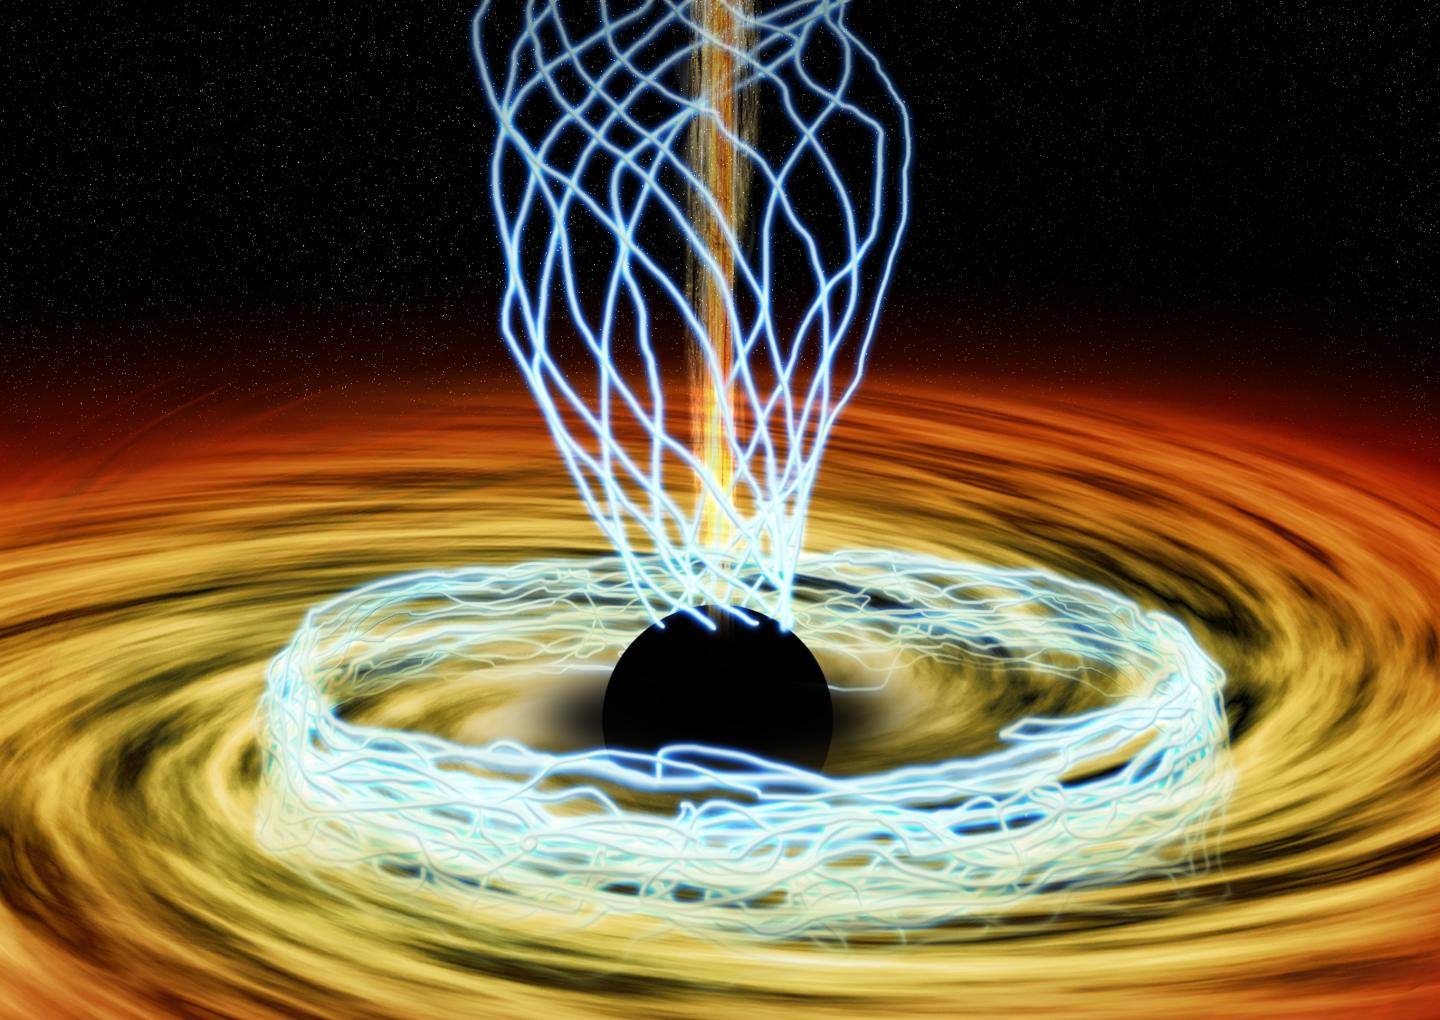 Artist's Conception of Black Hole with Magnetic Fields